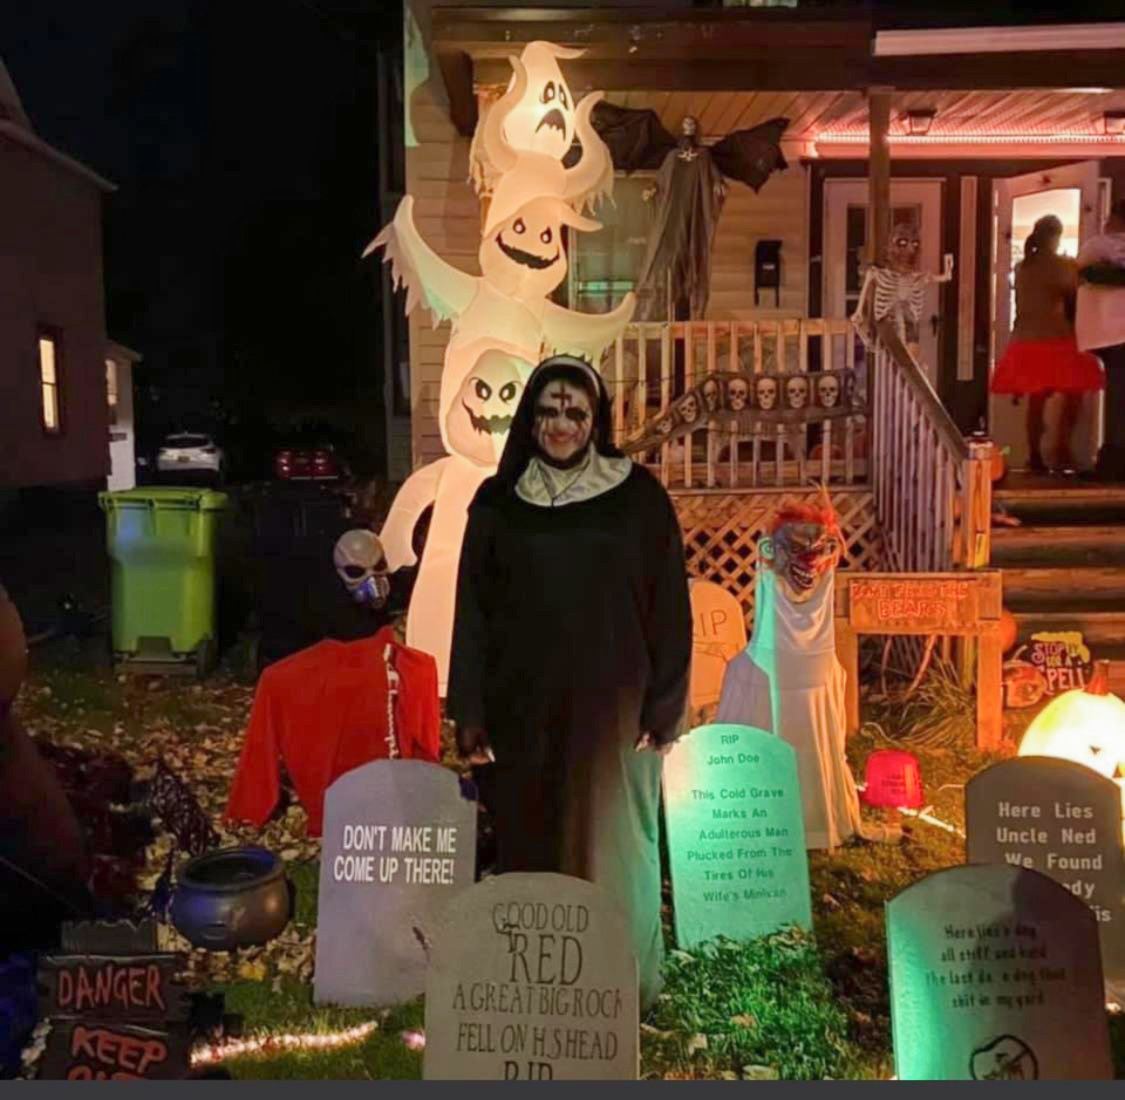 Halloween has become a seriously spooky holiday in Oneida since the inception of the Halloween Light Fight, encouraging people to compete for the spookiest house in the city